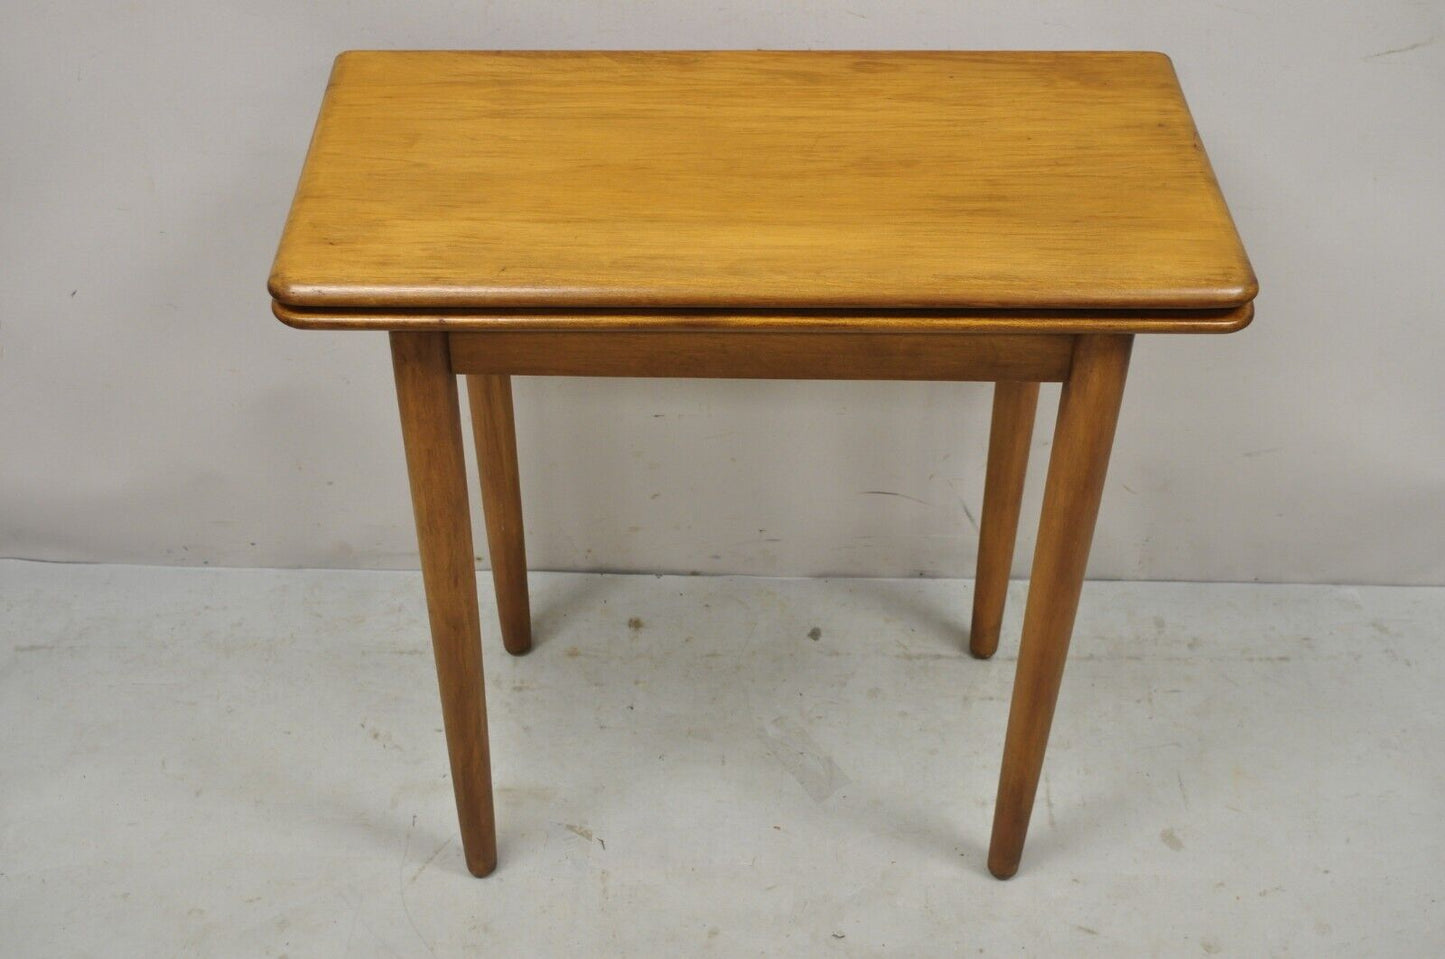 Vintage Mid Century Maple Wood Expanding Folding Game Table